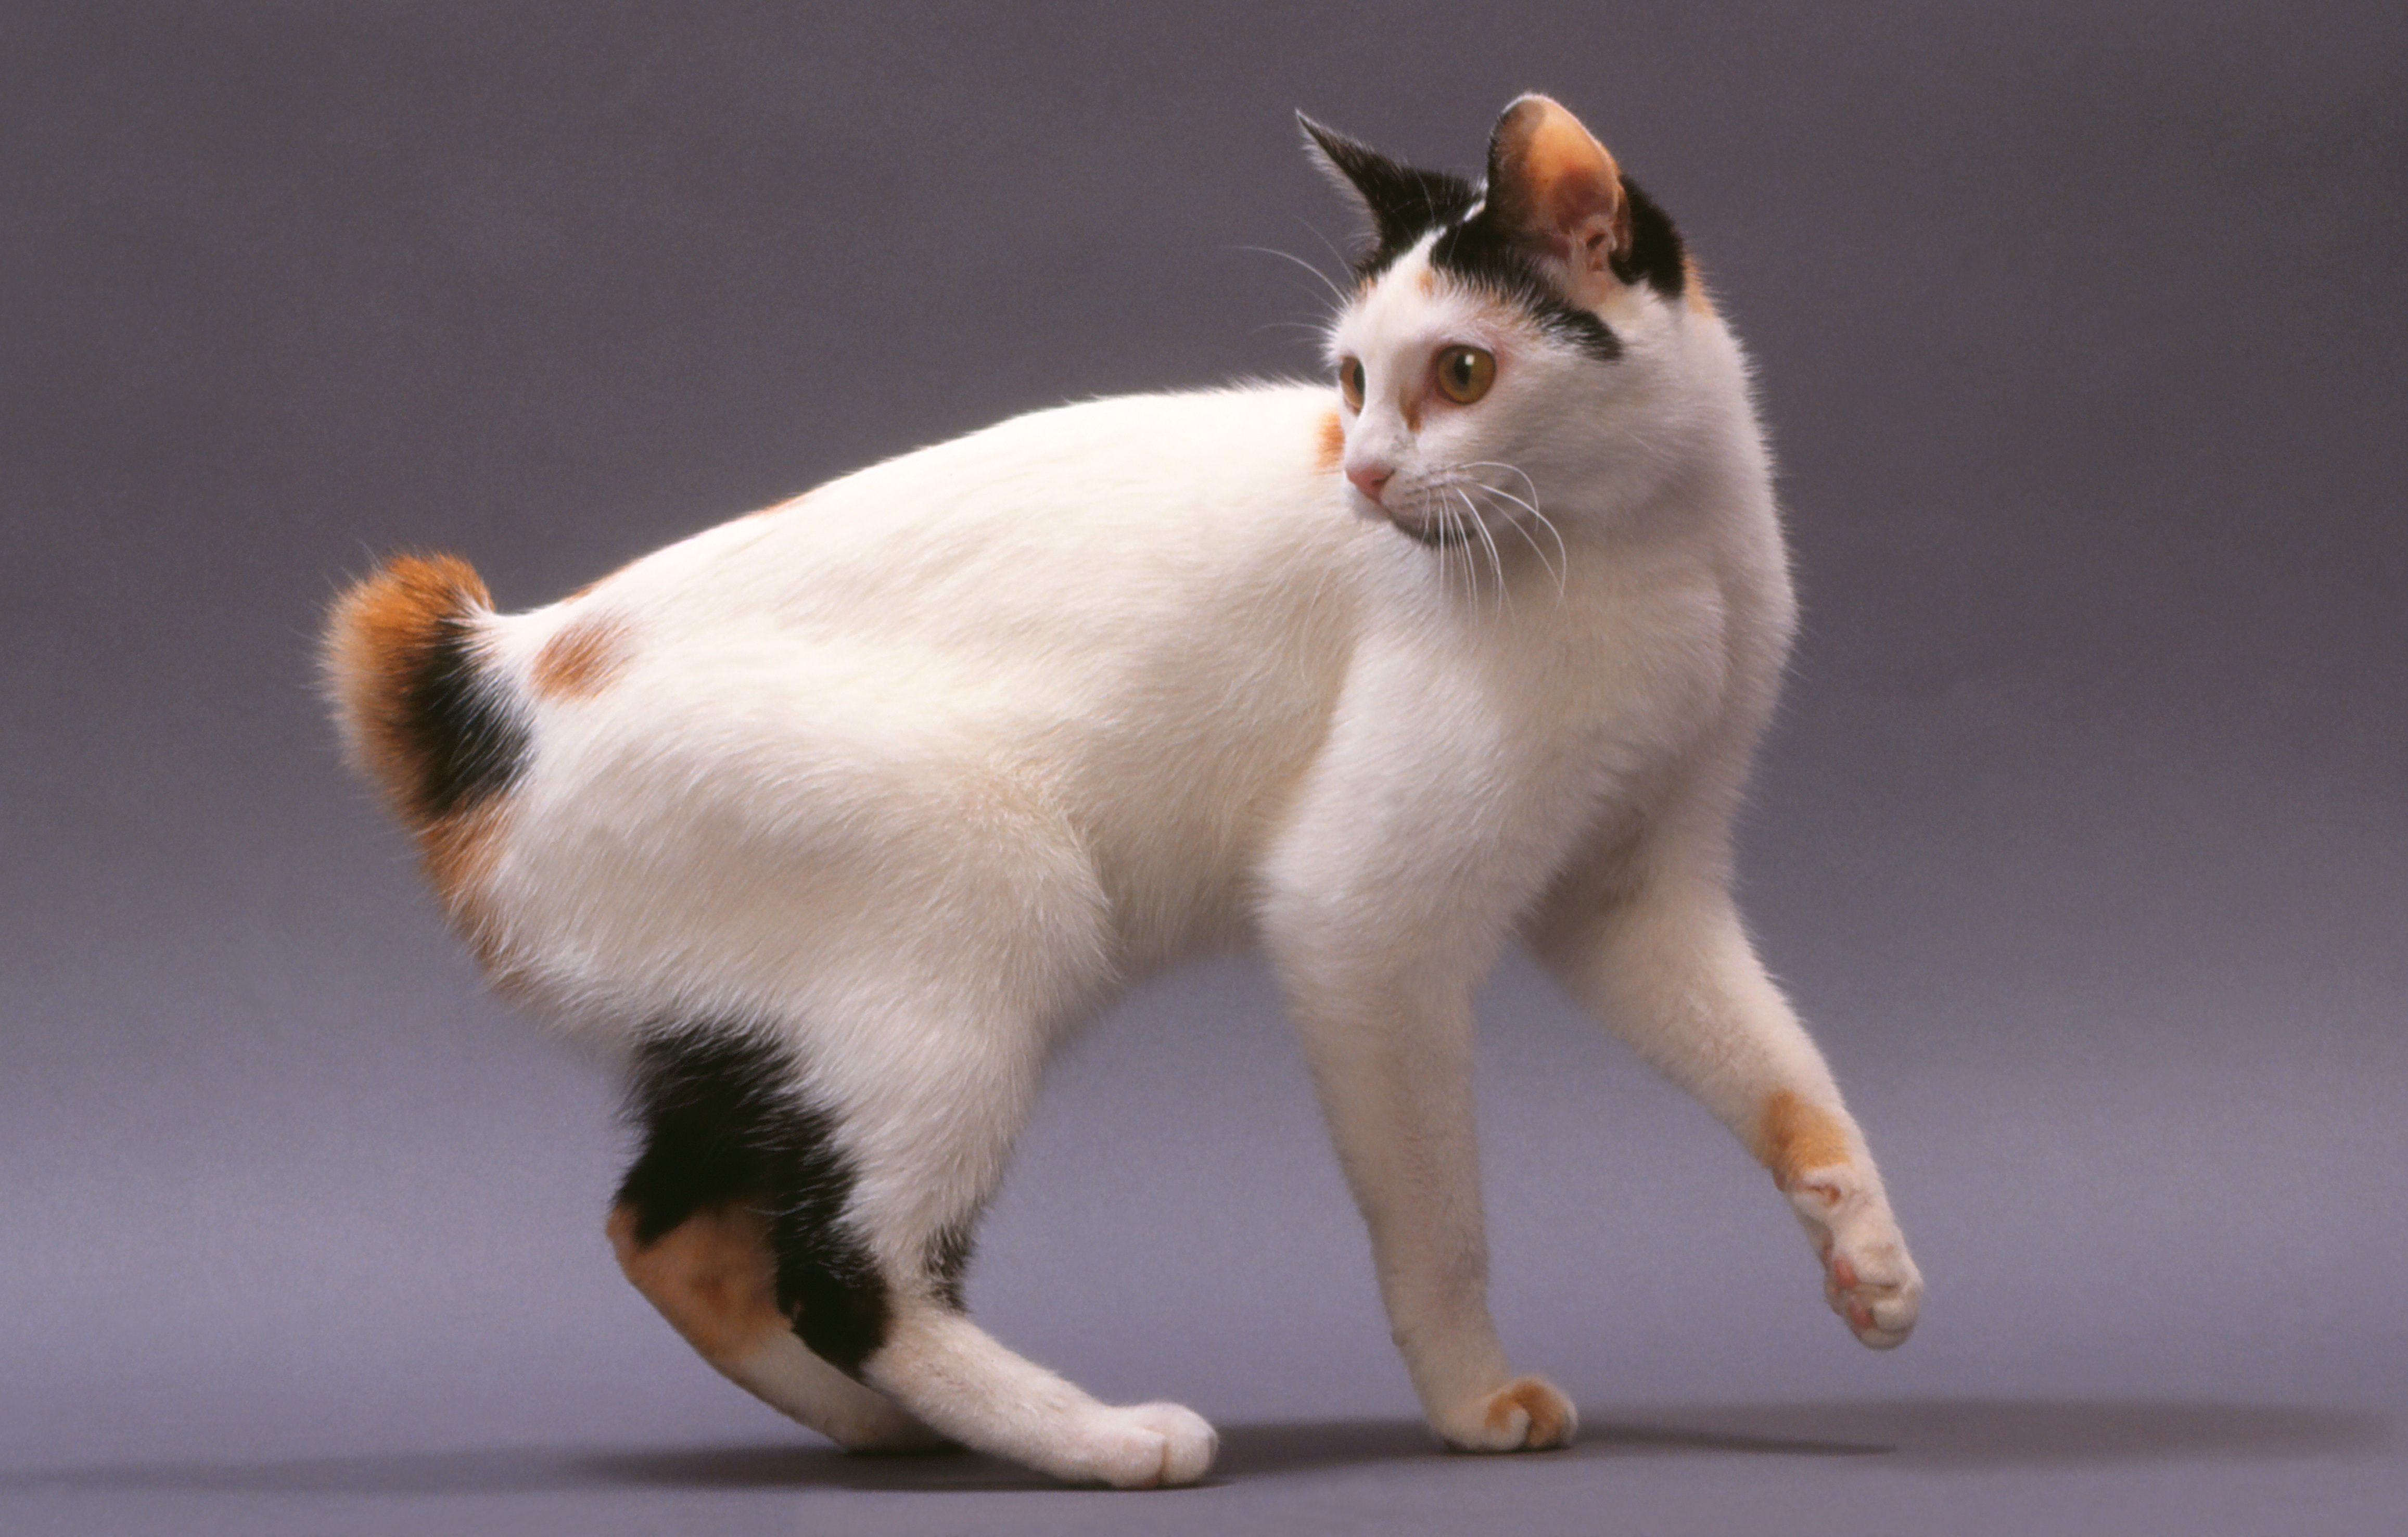 Why Do Cats Have Tails? Is There Really A Purpose? + Cat Tail Facts